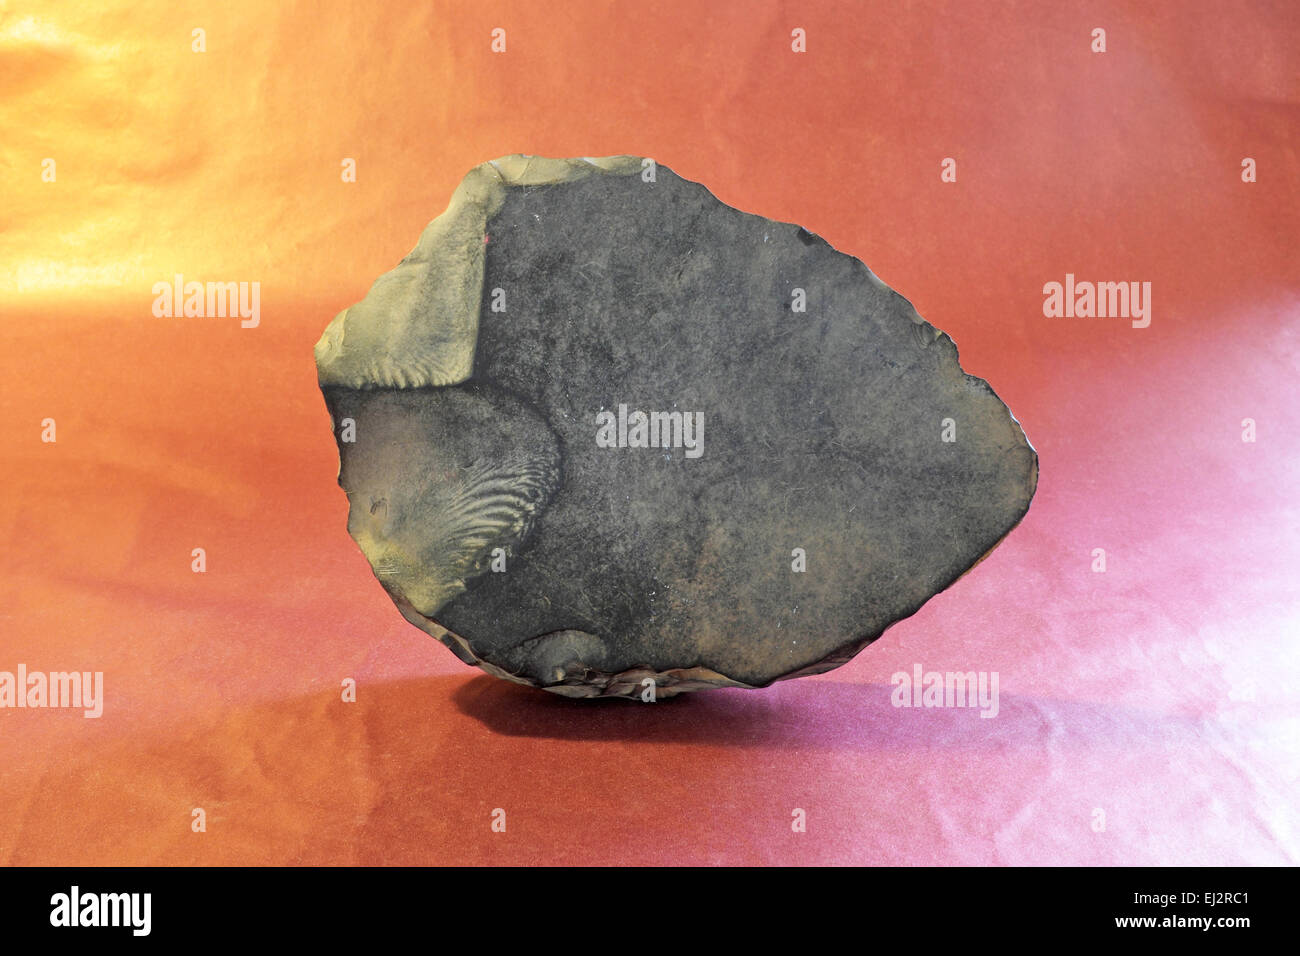 An Anasazi hand ax or digging tool from the Pueblo I period, made from basalt, 750 to 900 AD. Stock Photo